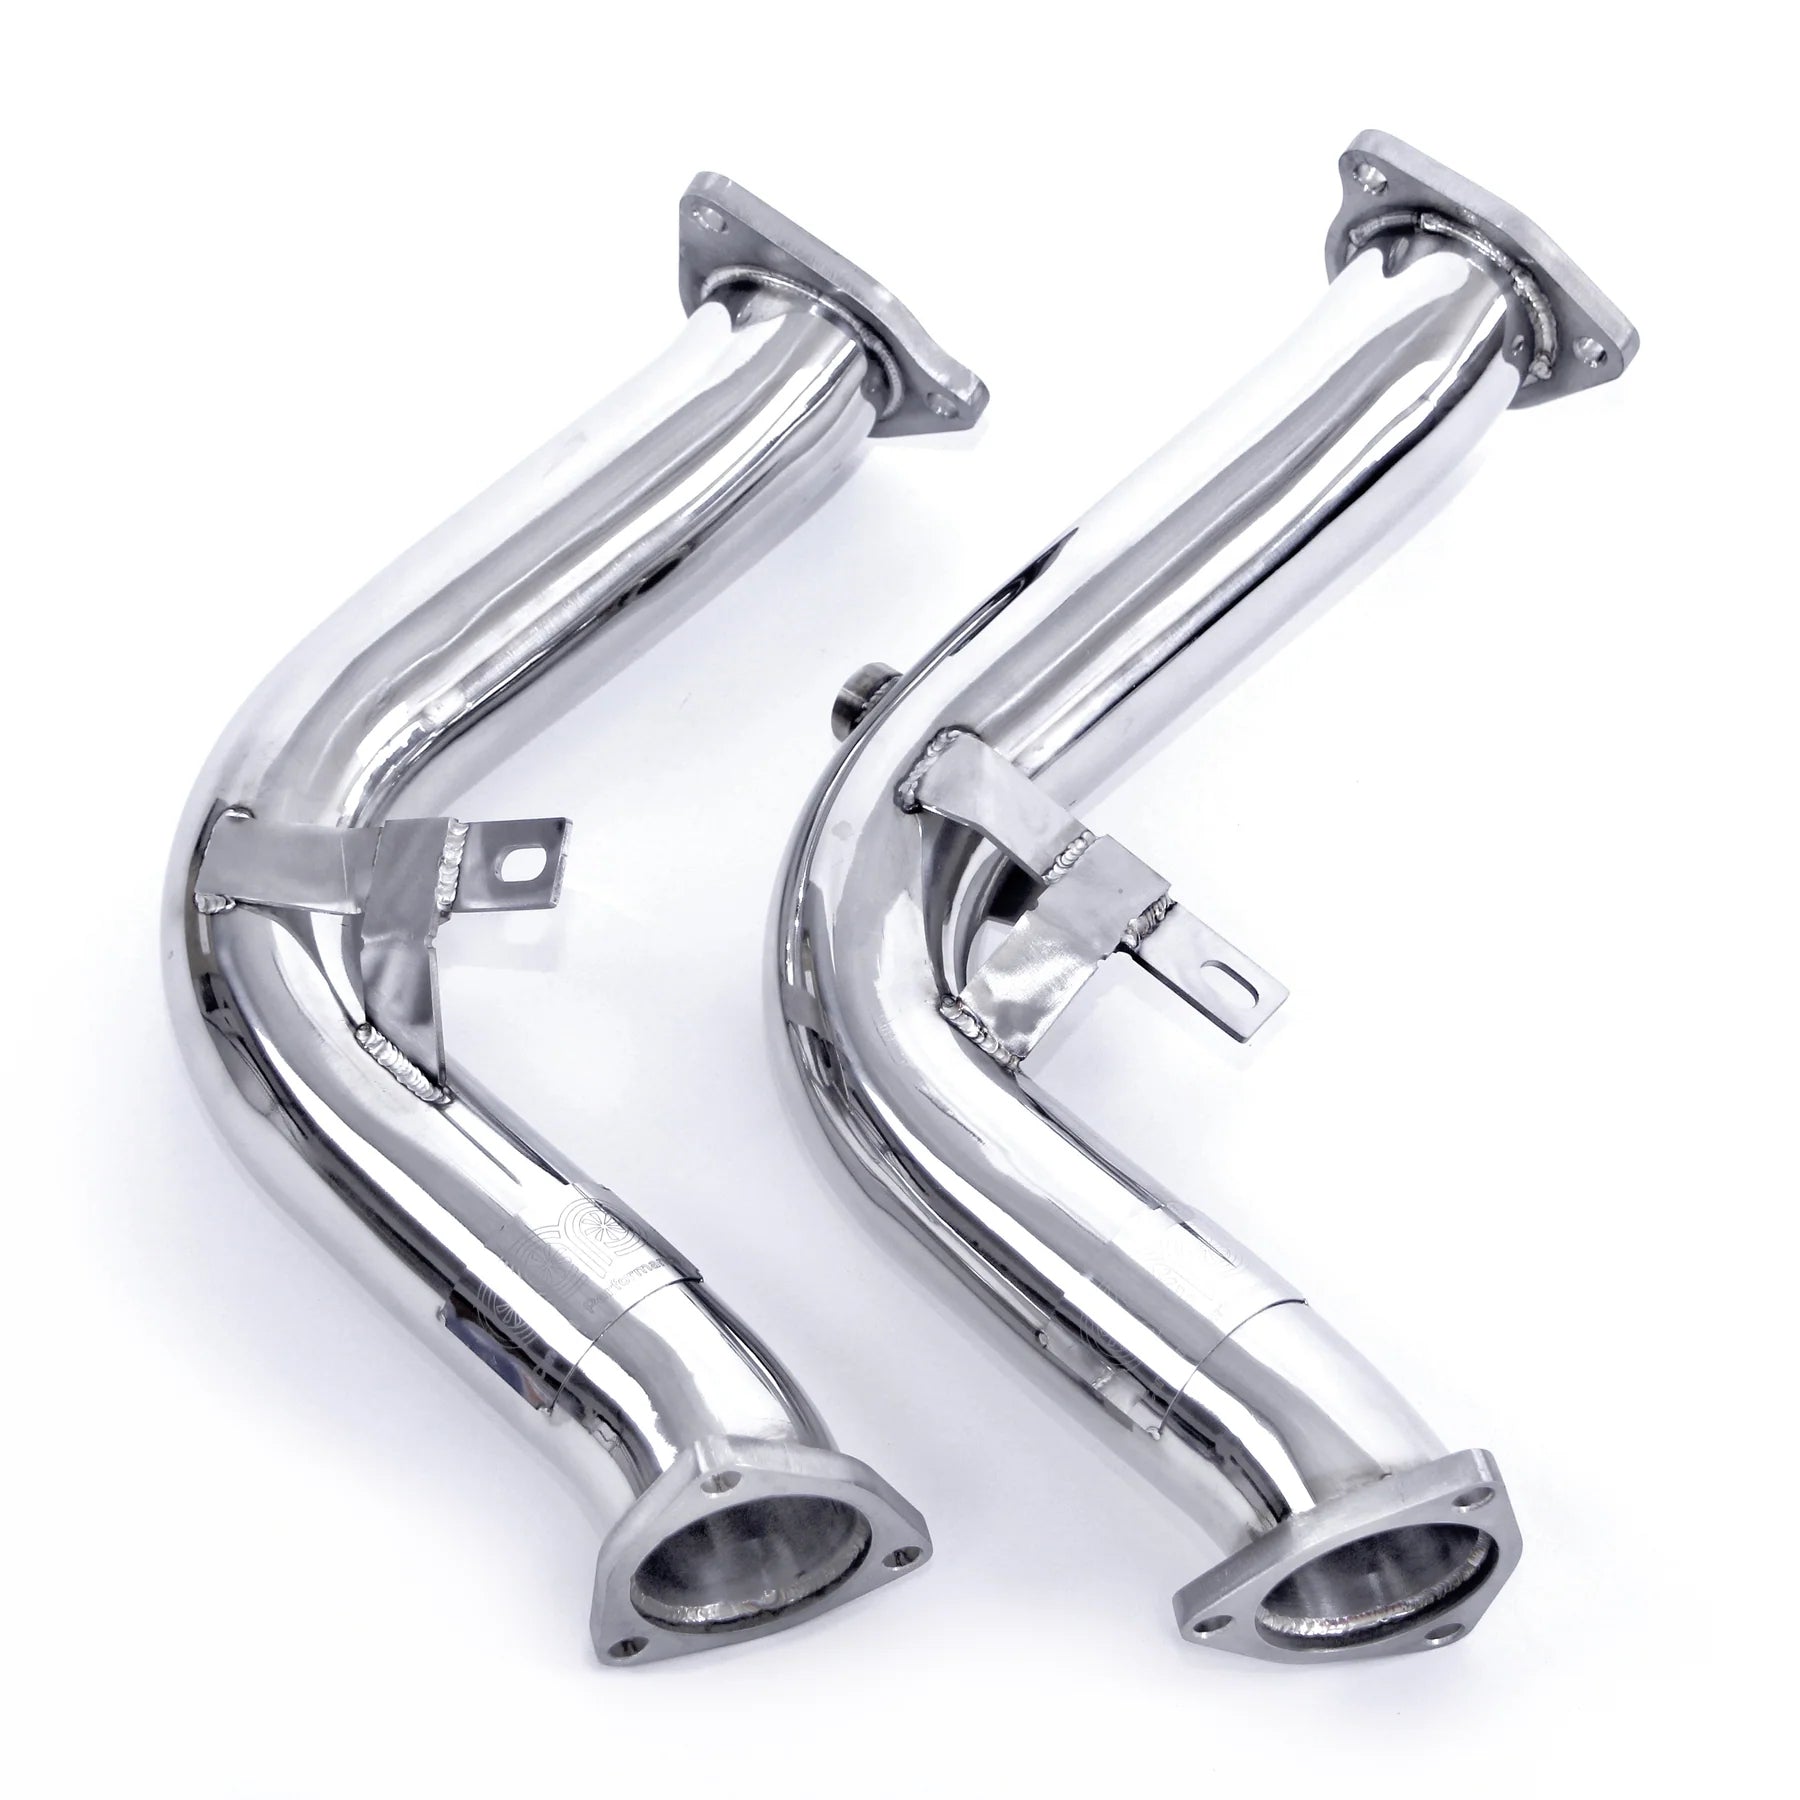 Ultimate CAP Exhaust Combo - Audi 3.0T Supercharged Test Pipes & Downpipes - Audi B8 S4, S5, A6, A7, A8, Q5, SQ5